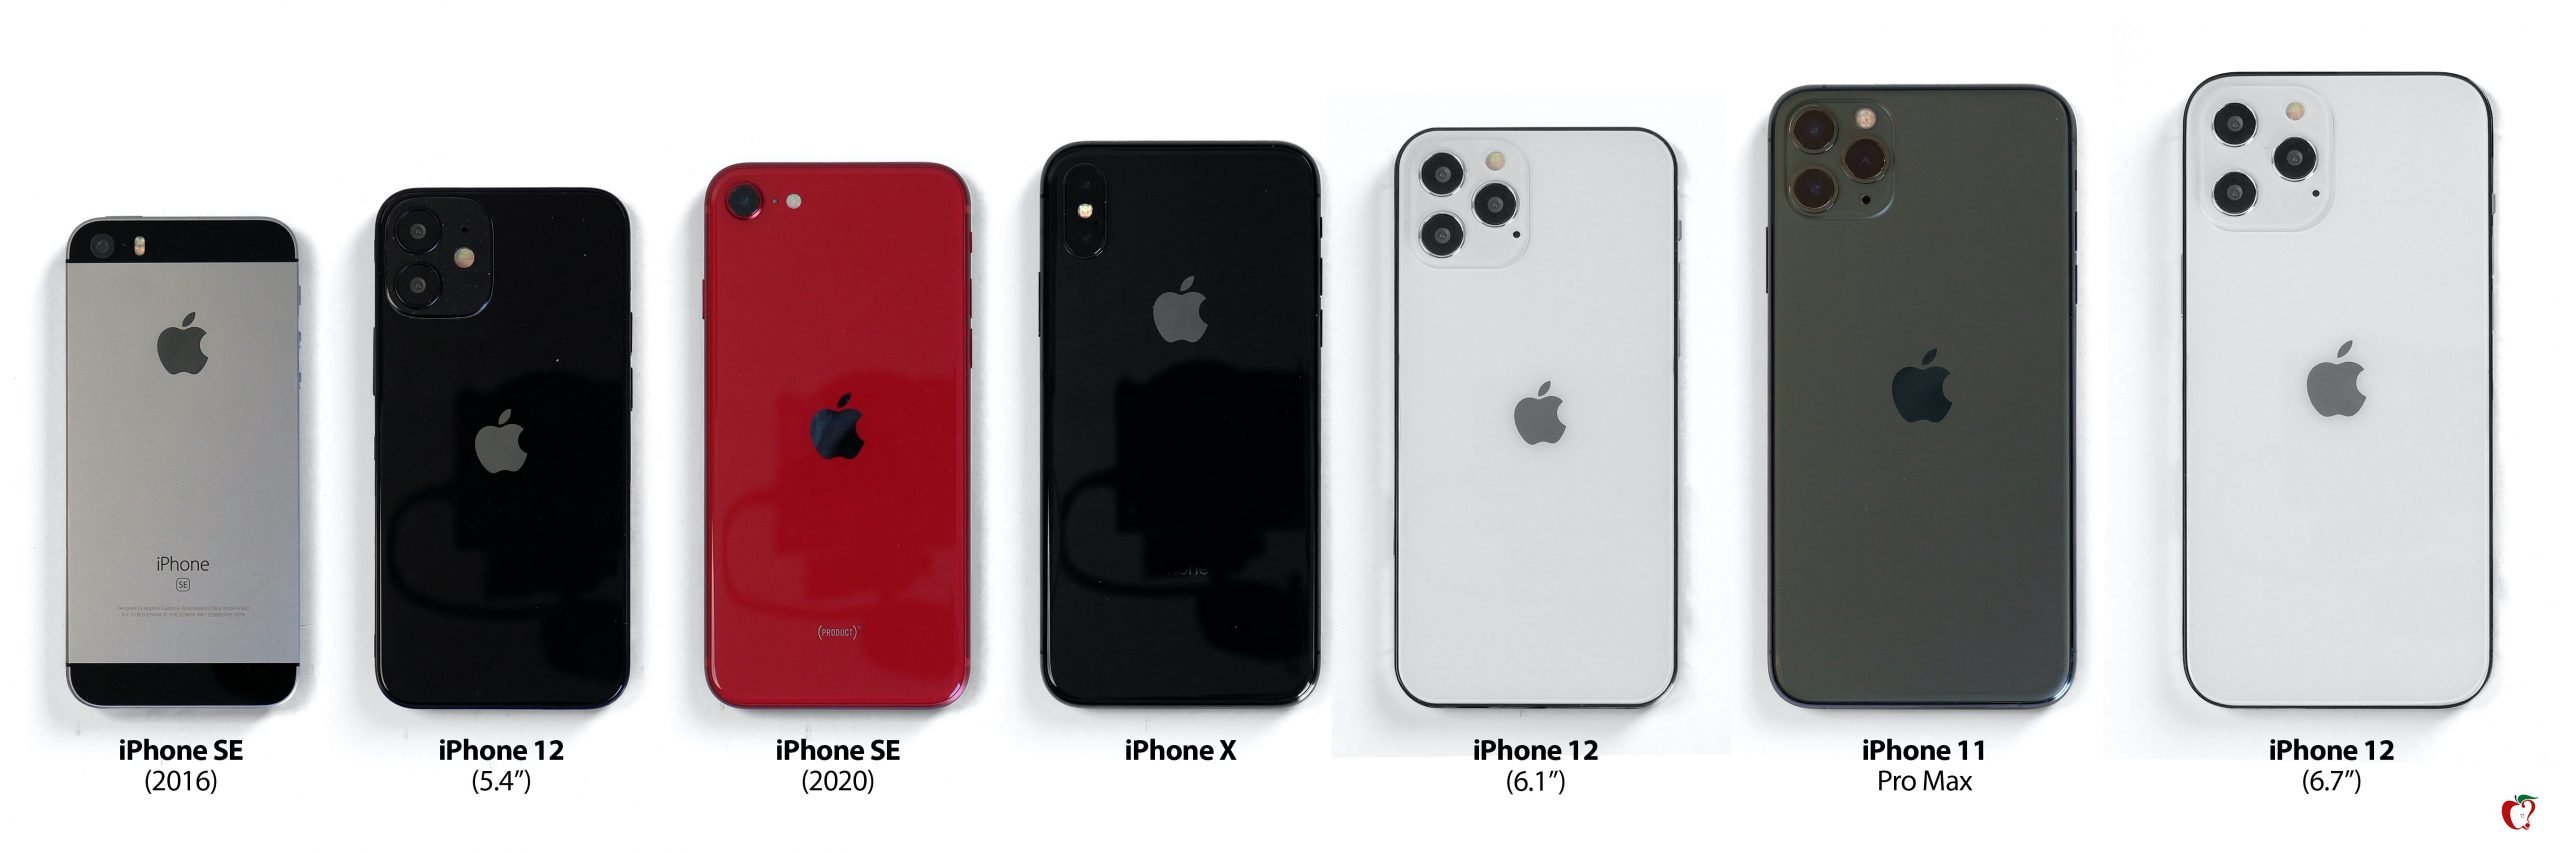 iPhone 12 comparaison taille